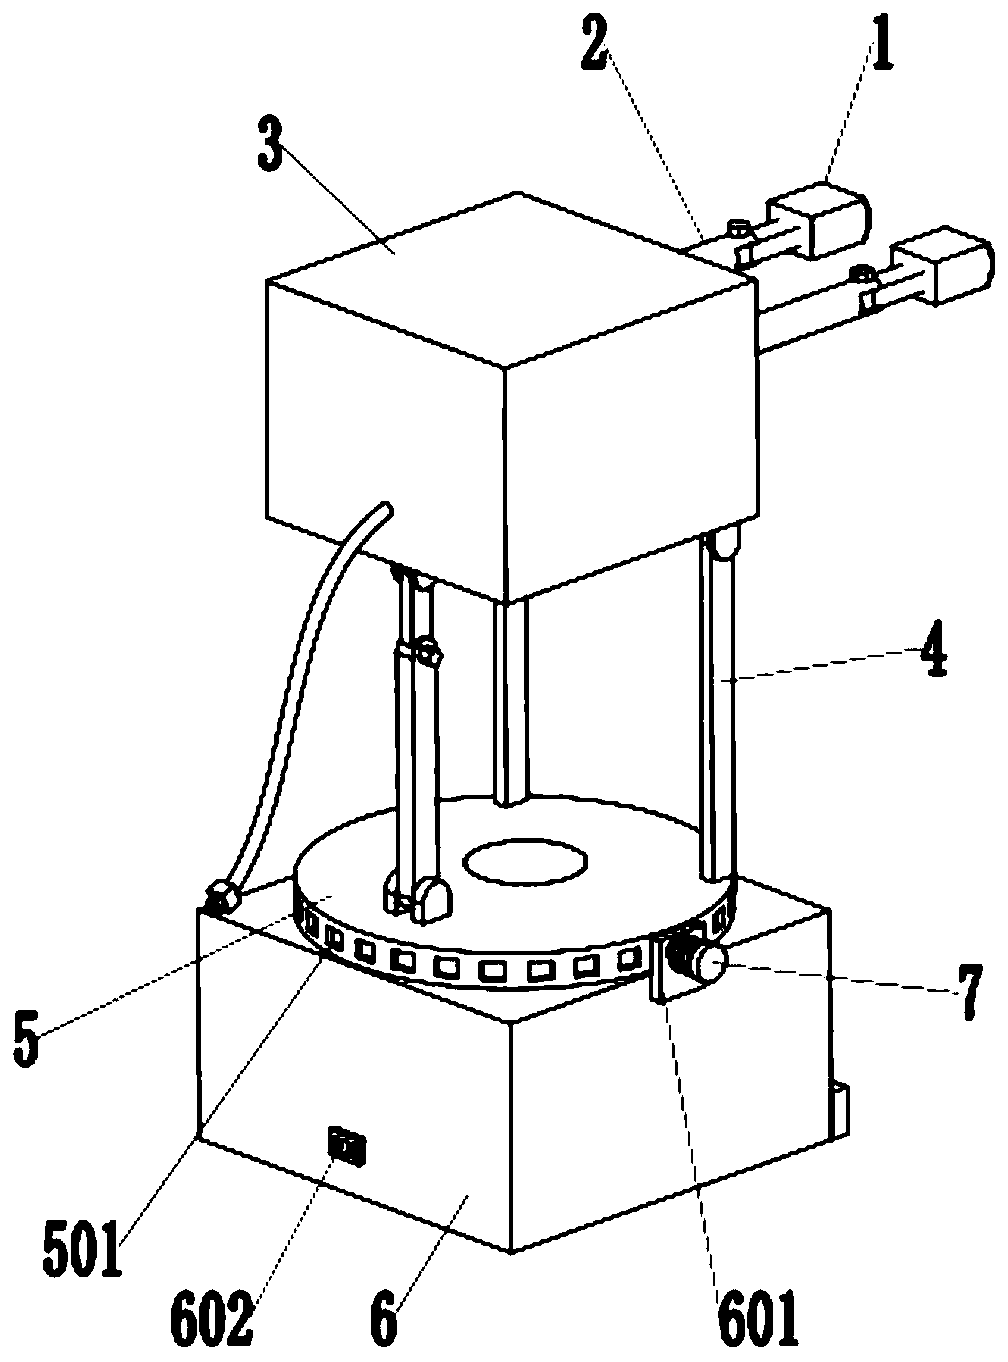 Back-pounding device with adjustable angle